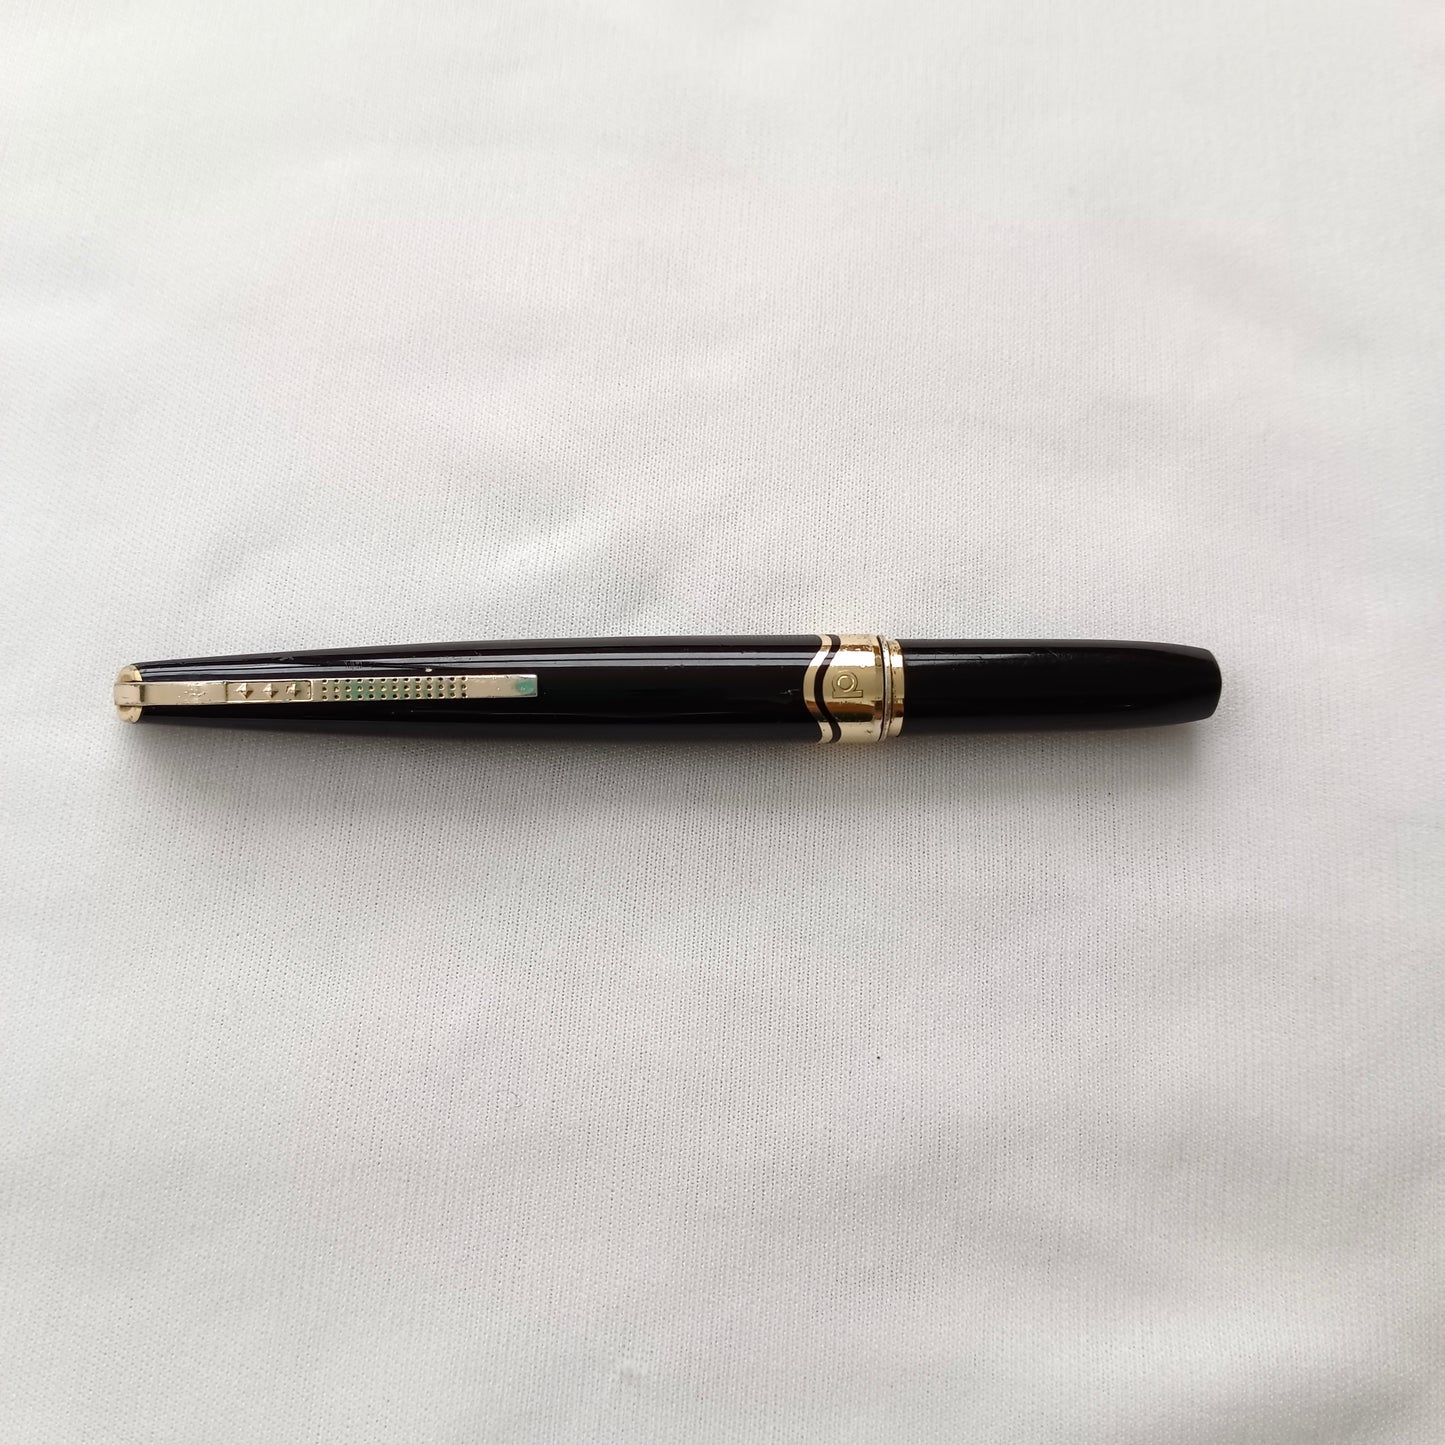 Platinum pocket Black fountain pen with 14Kt gold nib made in japan